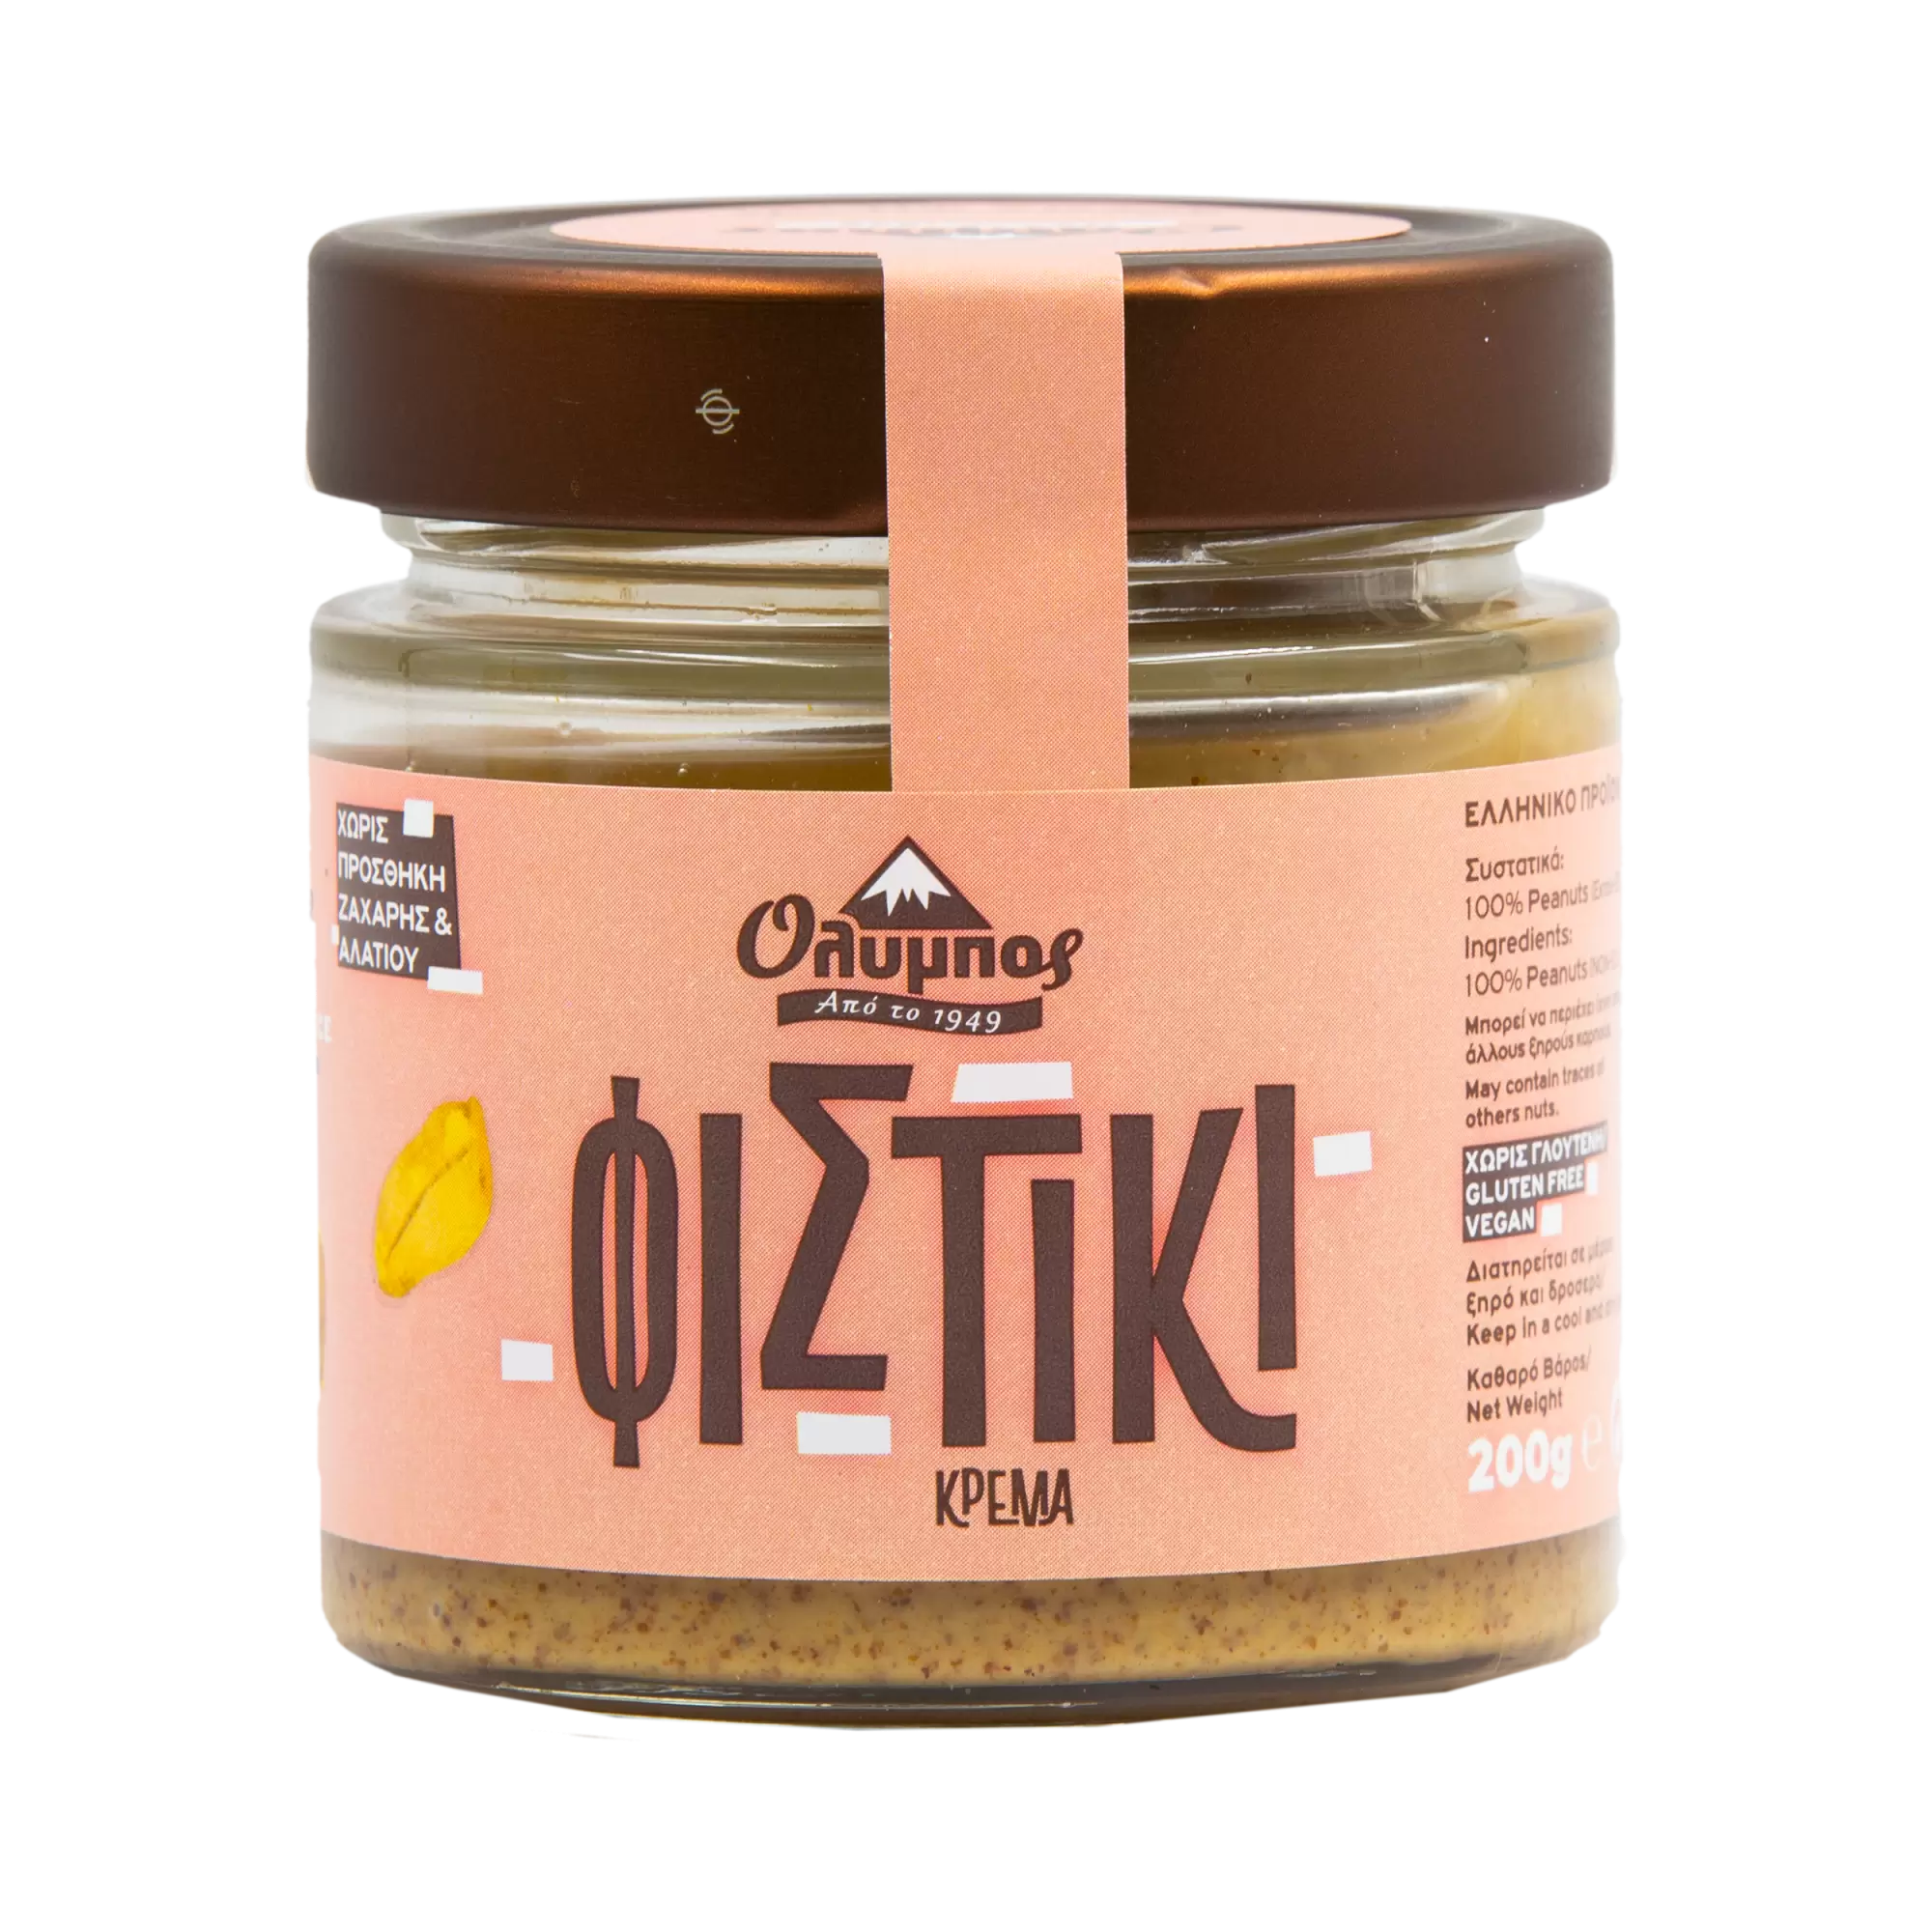 Peanut Butter Olympos (200g)